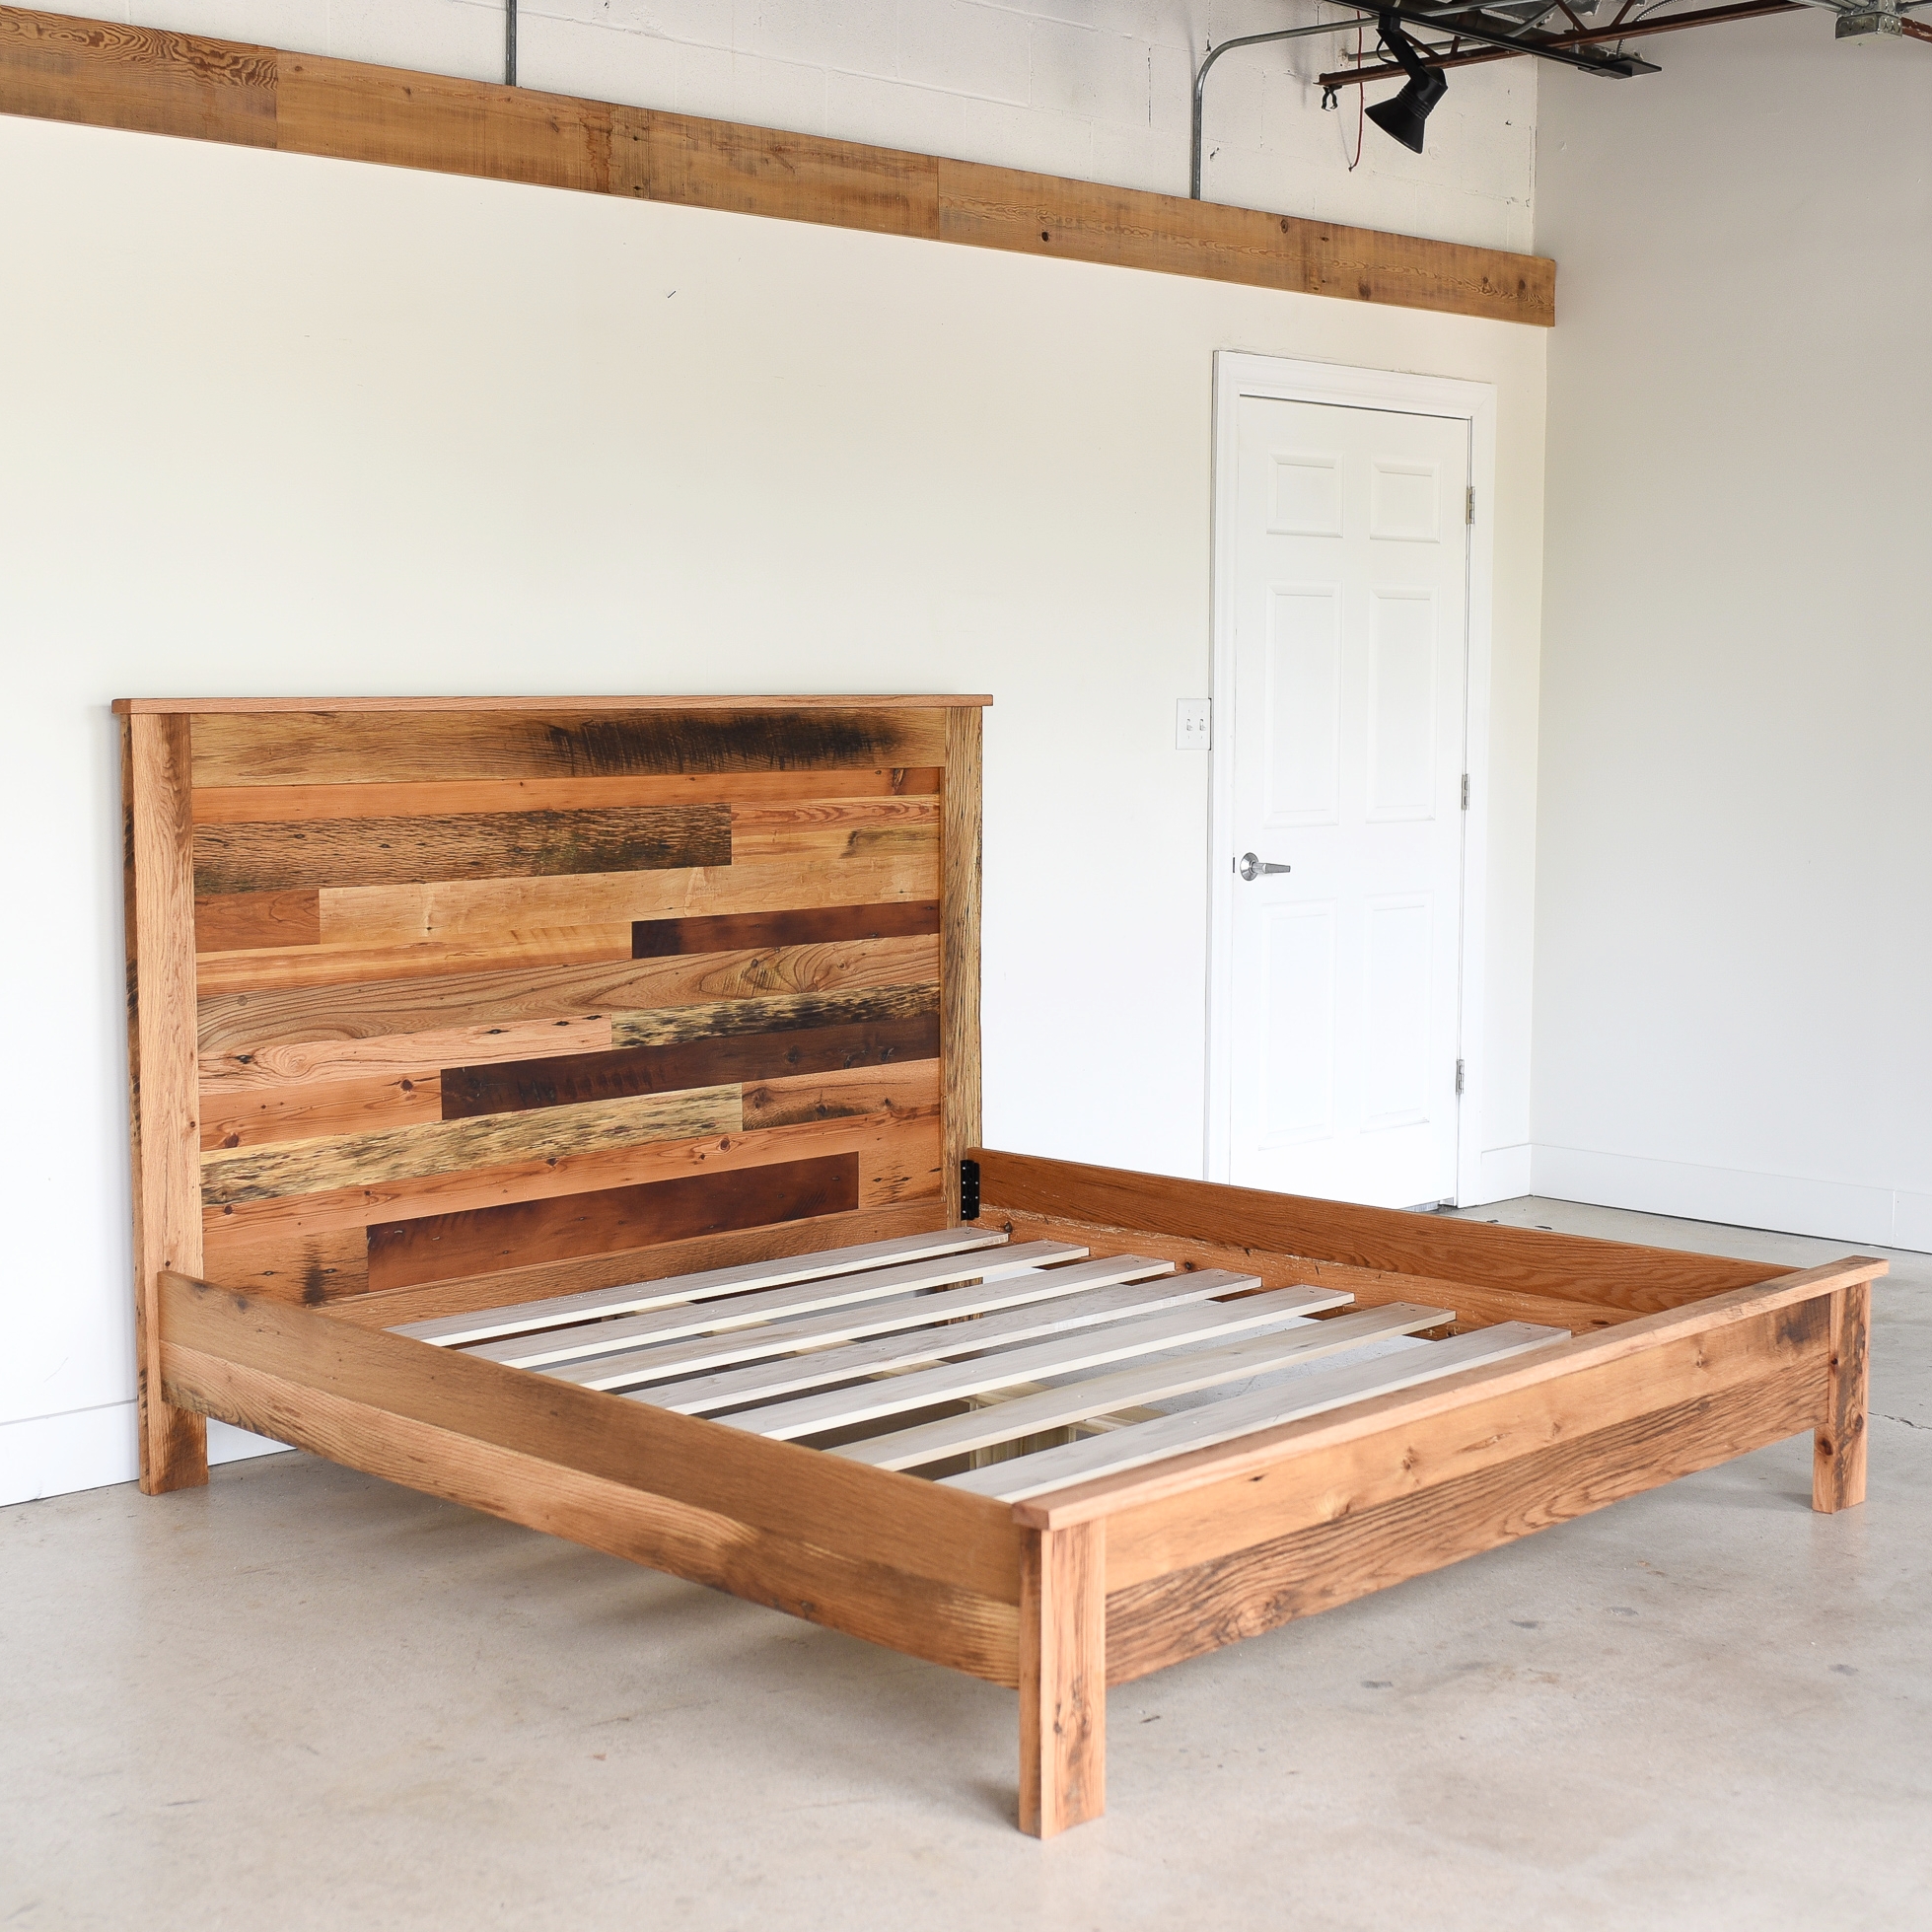 Rustic Reclaimed Wood Bed What We Make